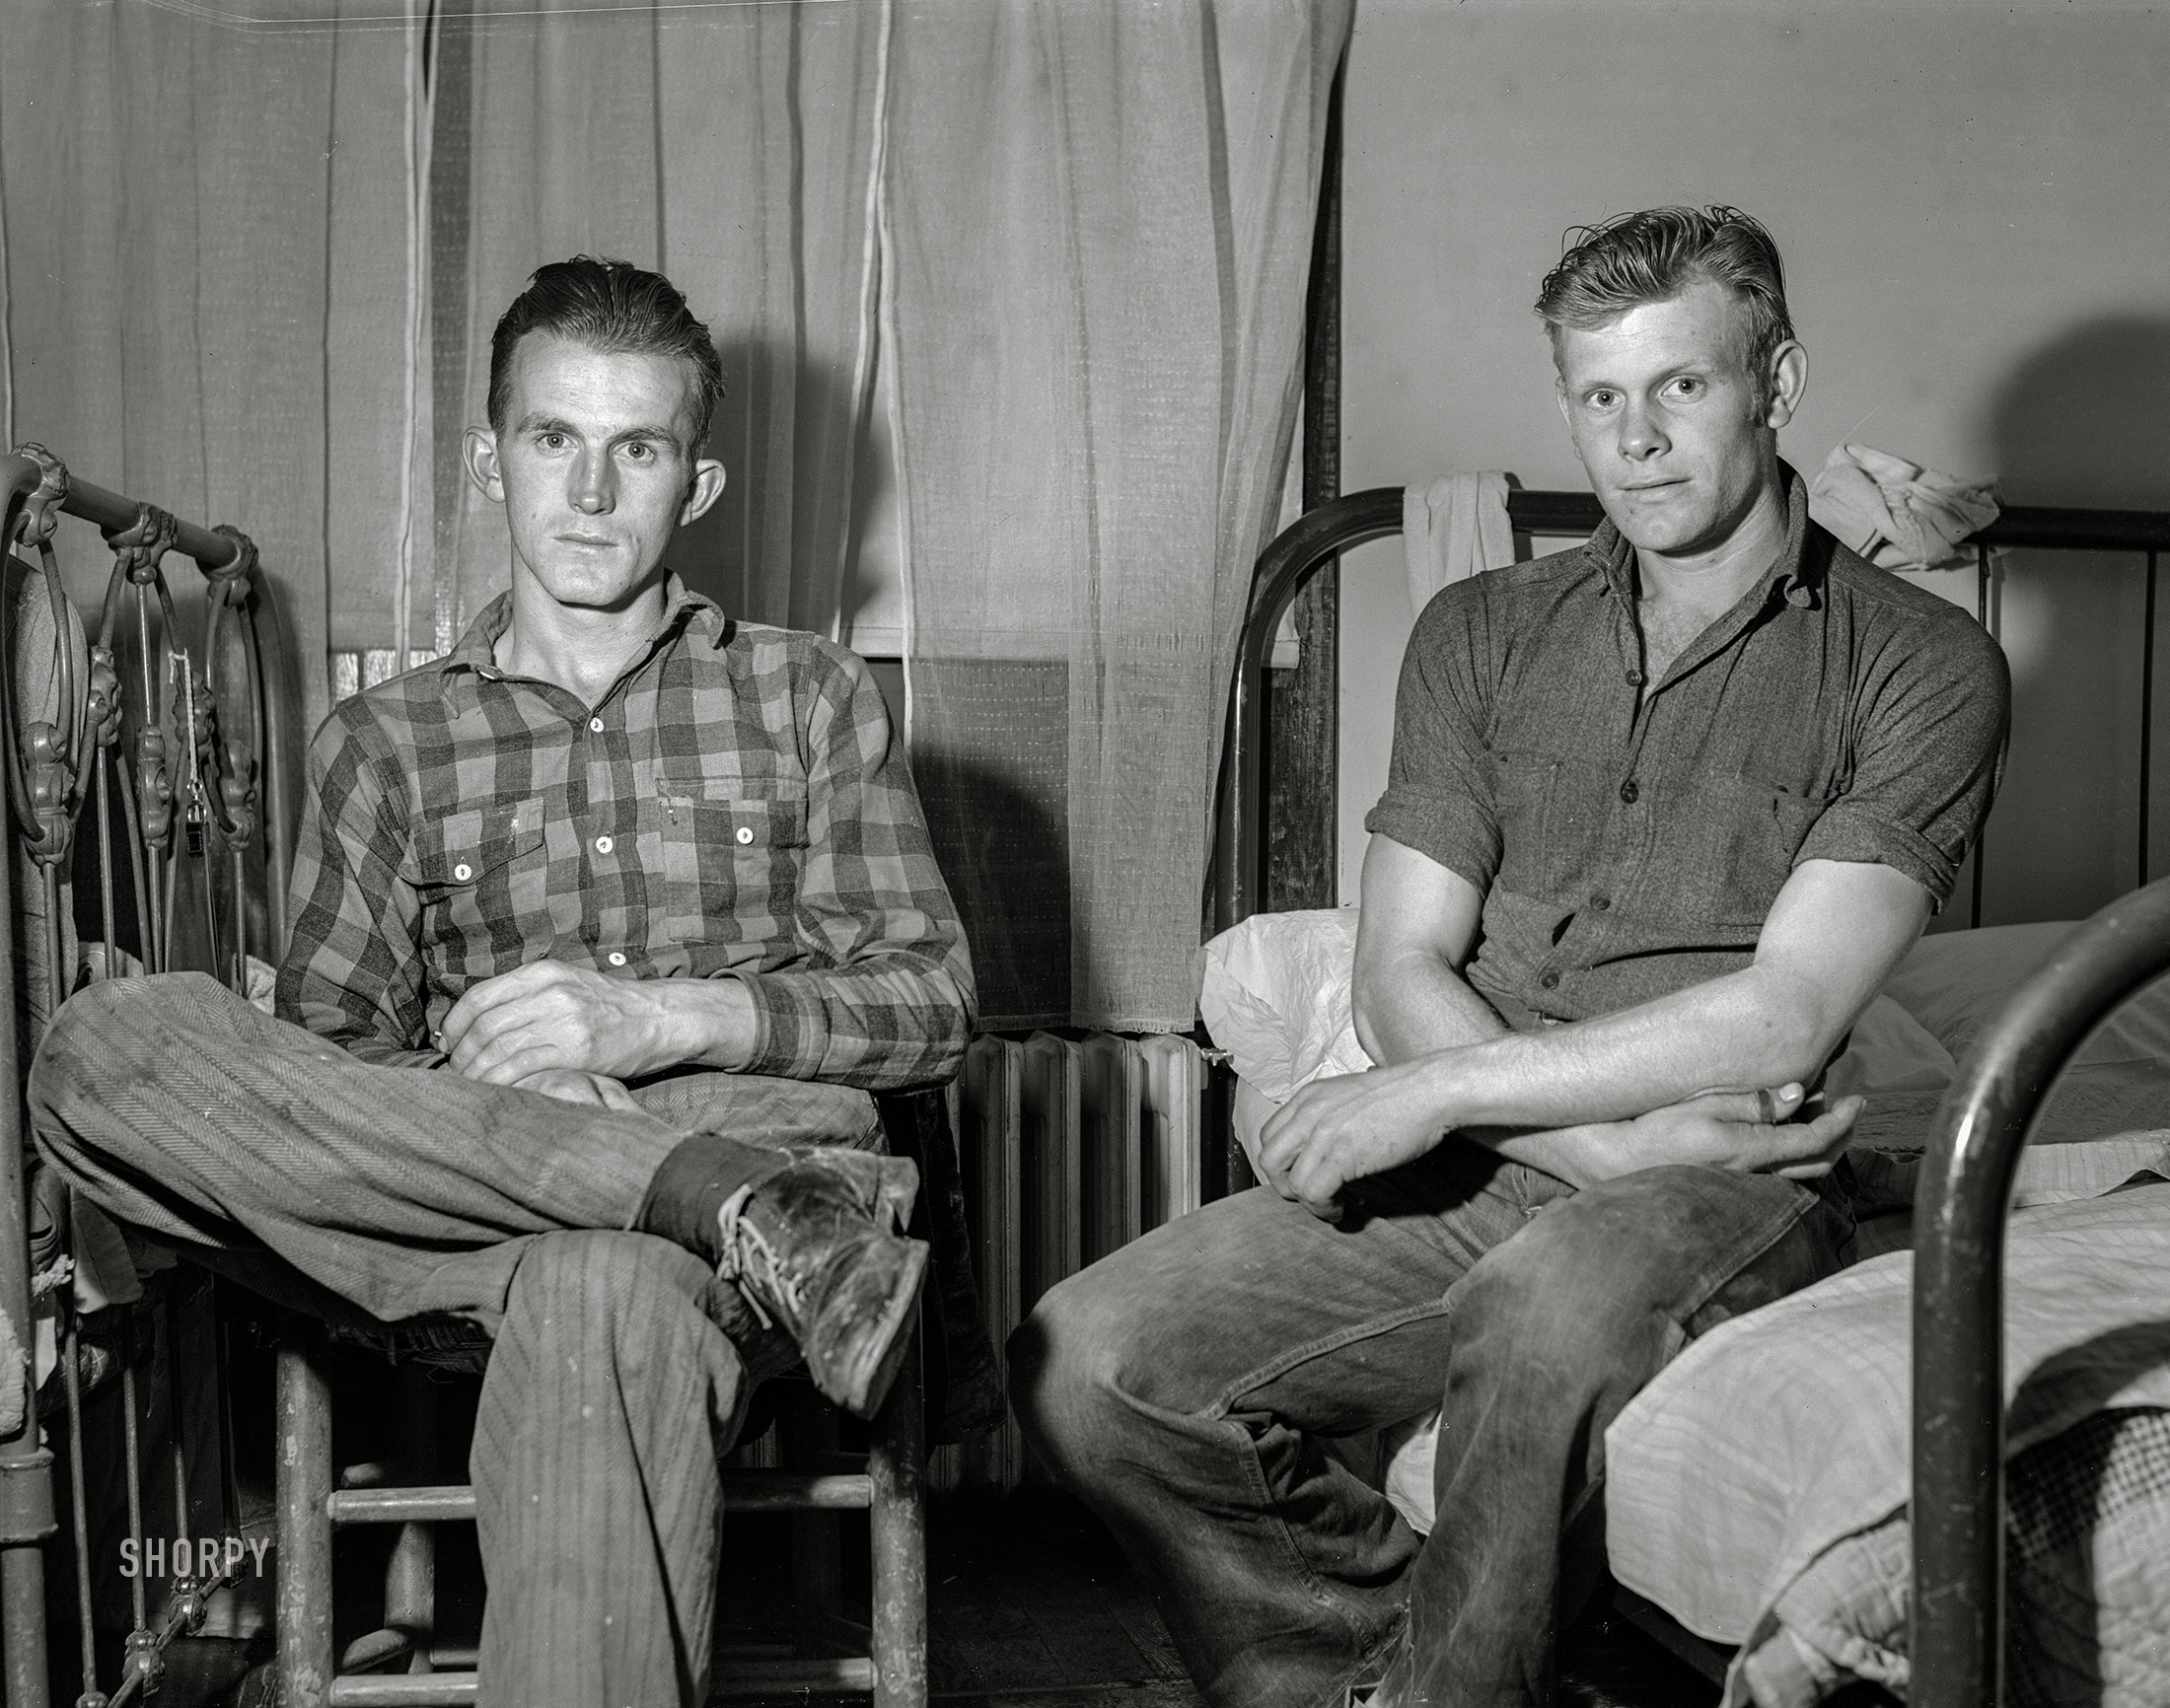 December 1940. Radford, Virginia. "Construction workers in room at Mrs. Jones's boardinghouse. Six men live in this room. Three beds, pay eight to ten dollars a week rent. Most of them have families they left behind in Bluefield, West Virginia; Bristol, Tennessee; or High Point, North Carolina. They are carpenters, carpenters' assistants, riggers and laborers. They make sixty cents to $1.25 per hour." Acetate negative by John Vachon. View full size.